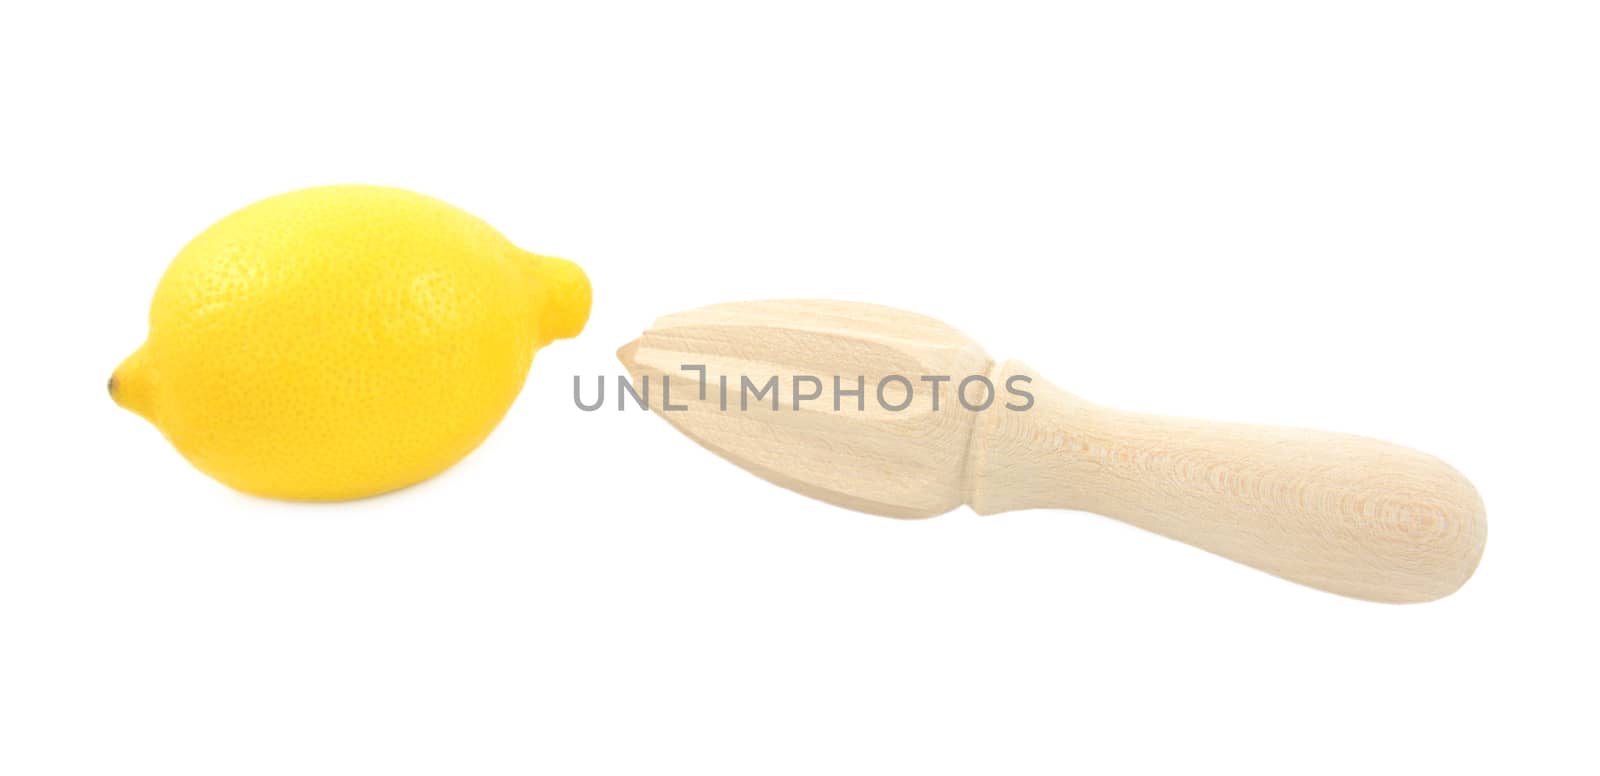 Whole lemon and wooden citrus reamer, isolated on a white background